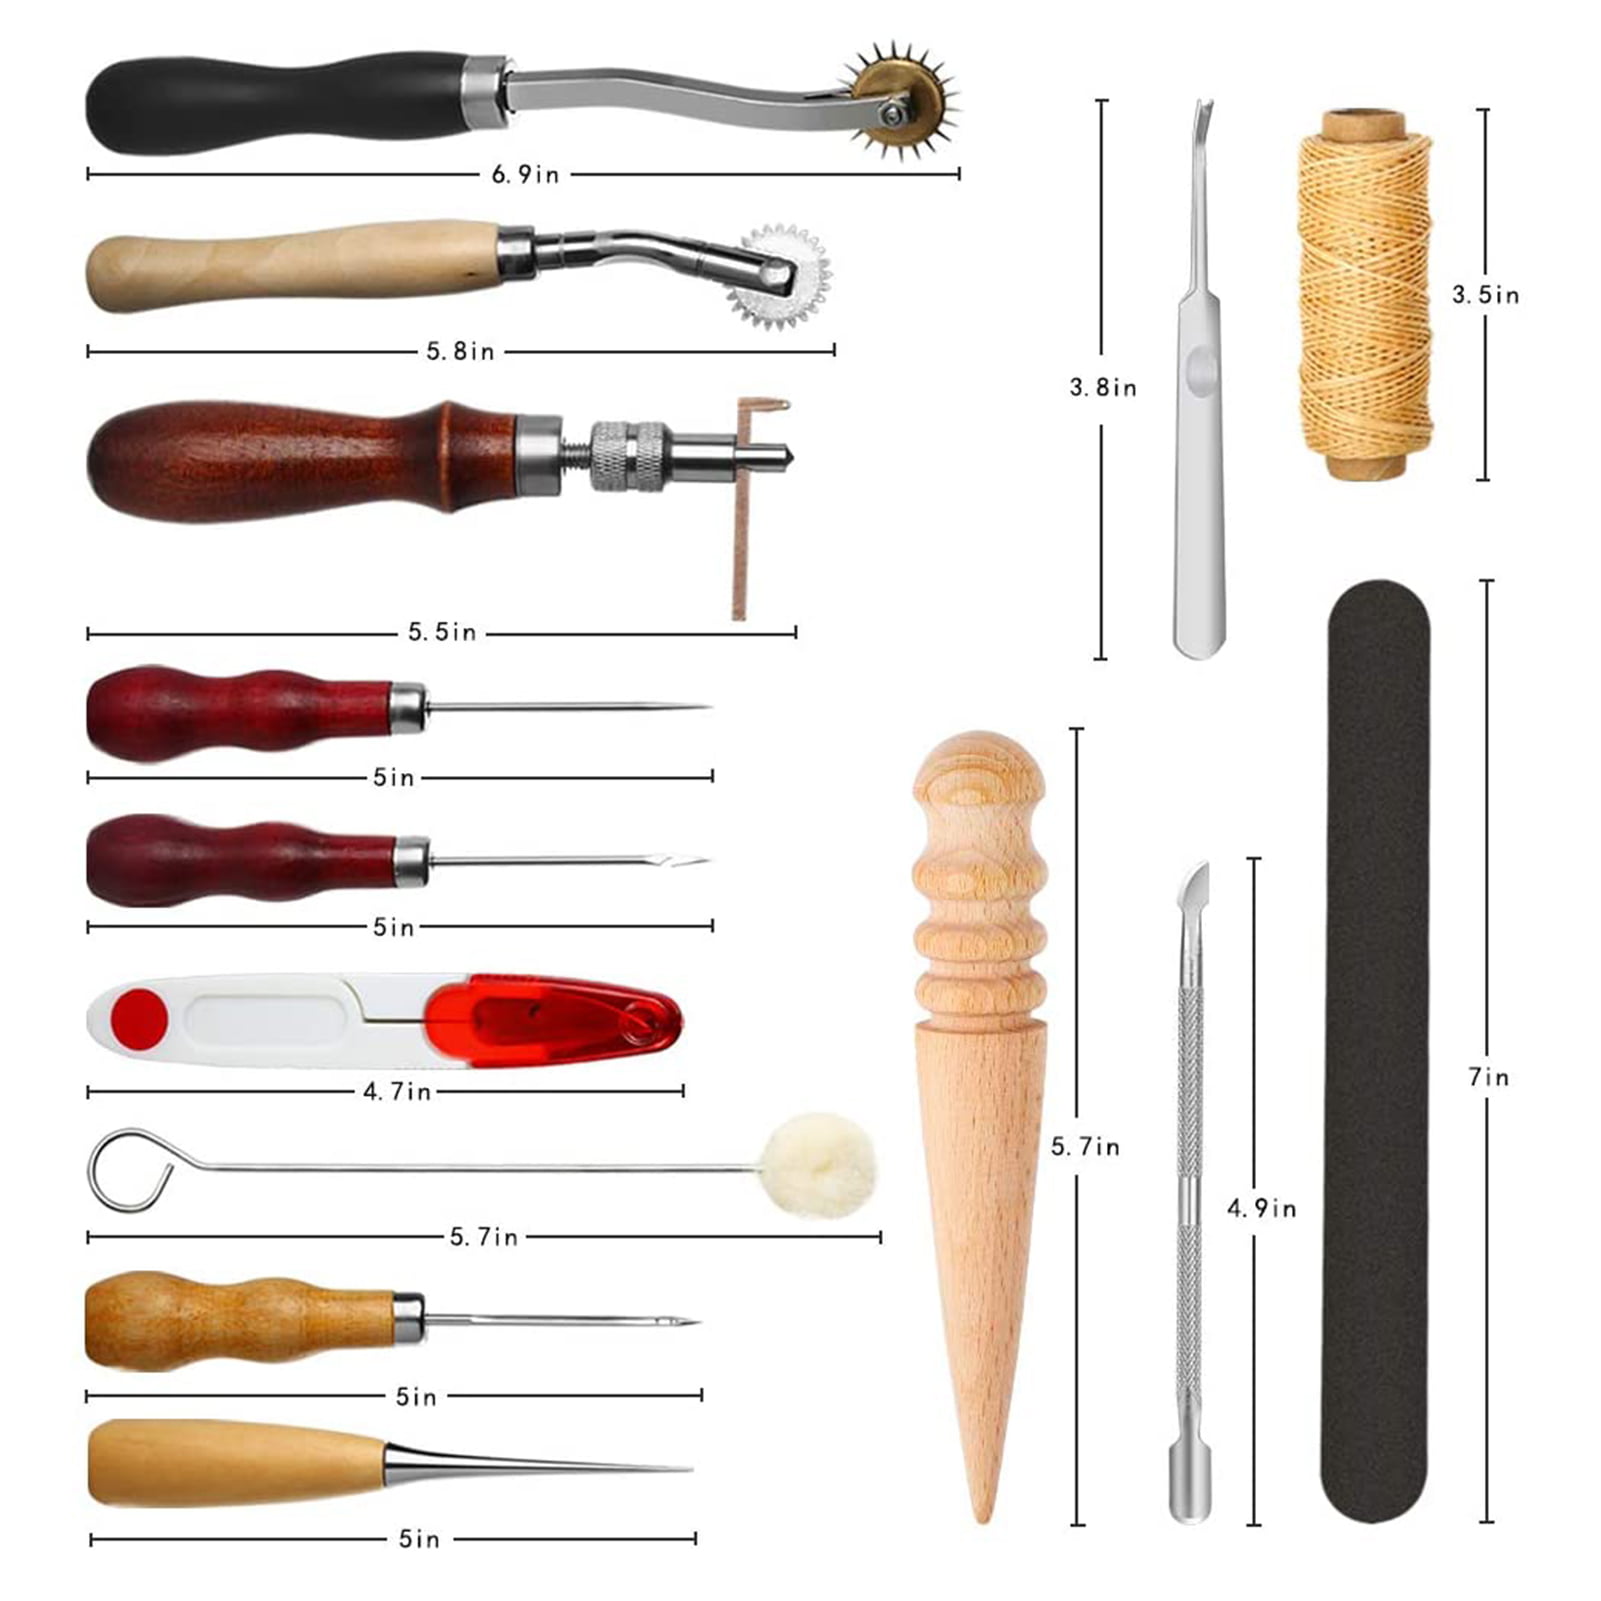 Dorhui Leather Craft Tools Kit, Leather Working Tools and Supplies for Christmas Gift Leather Craft Stamping Tool Waxed Thread Groover Awl Stitching